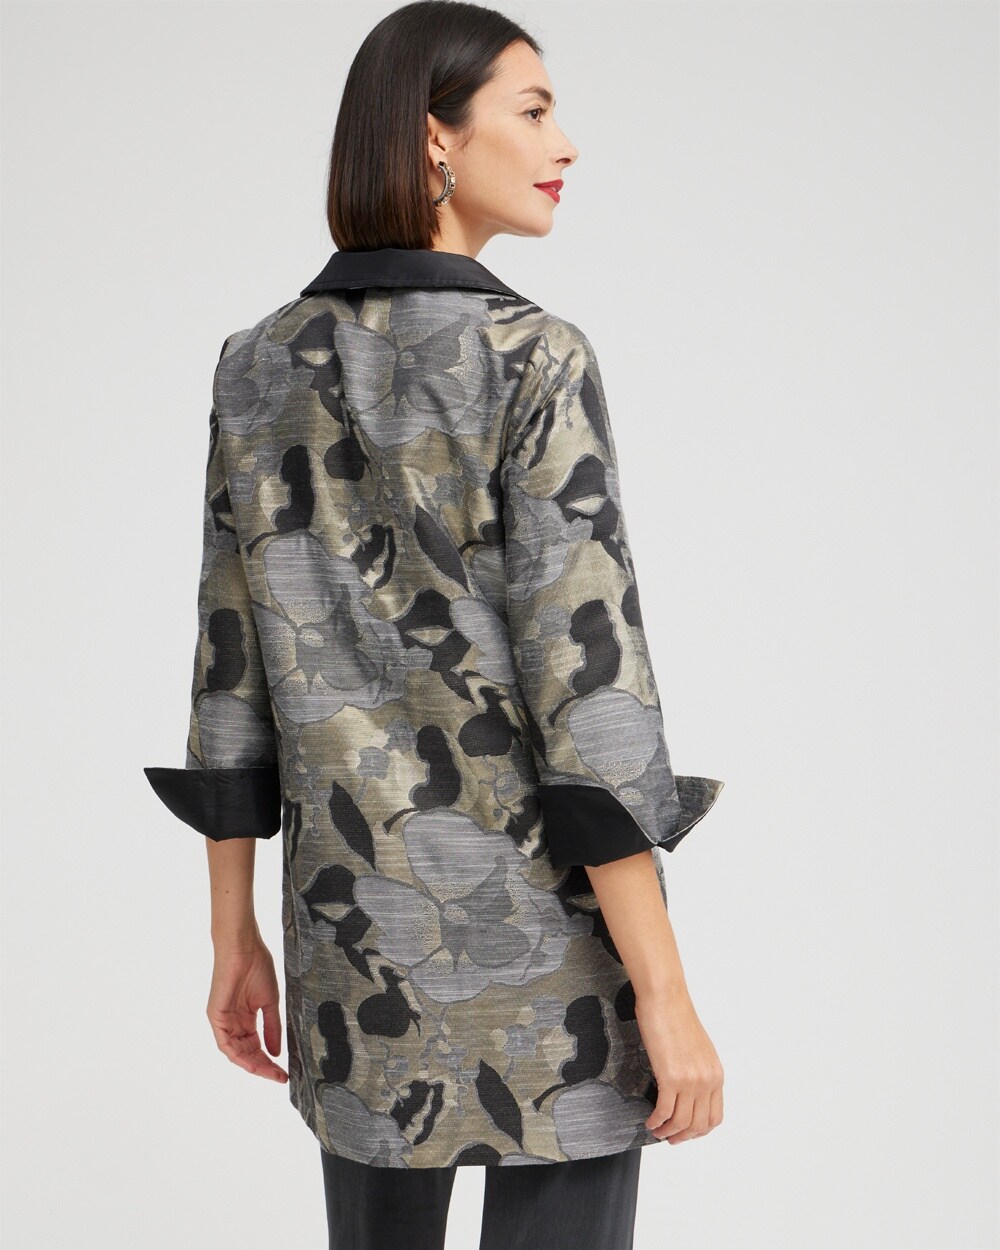 Travelers Collection Floral Jacquard Jacket